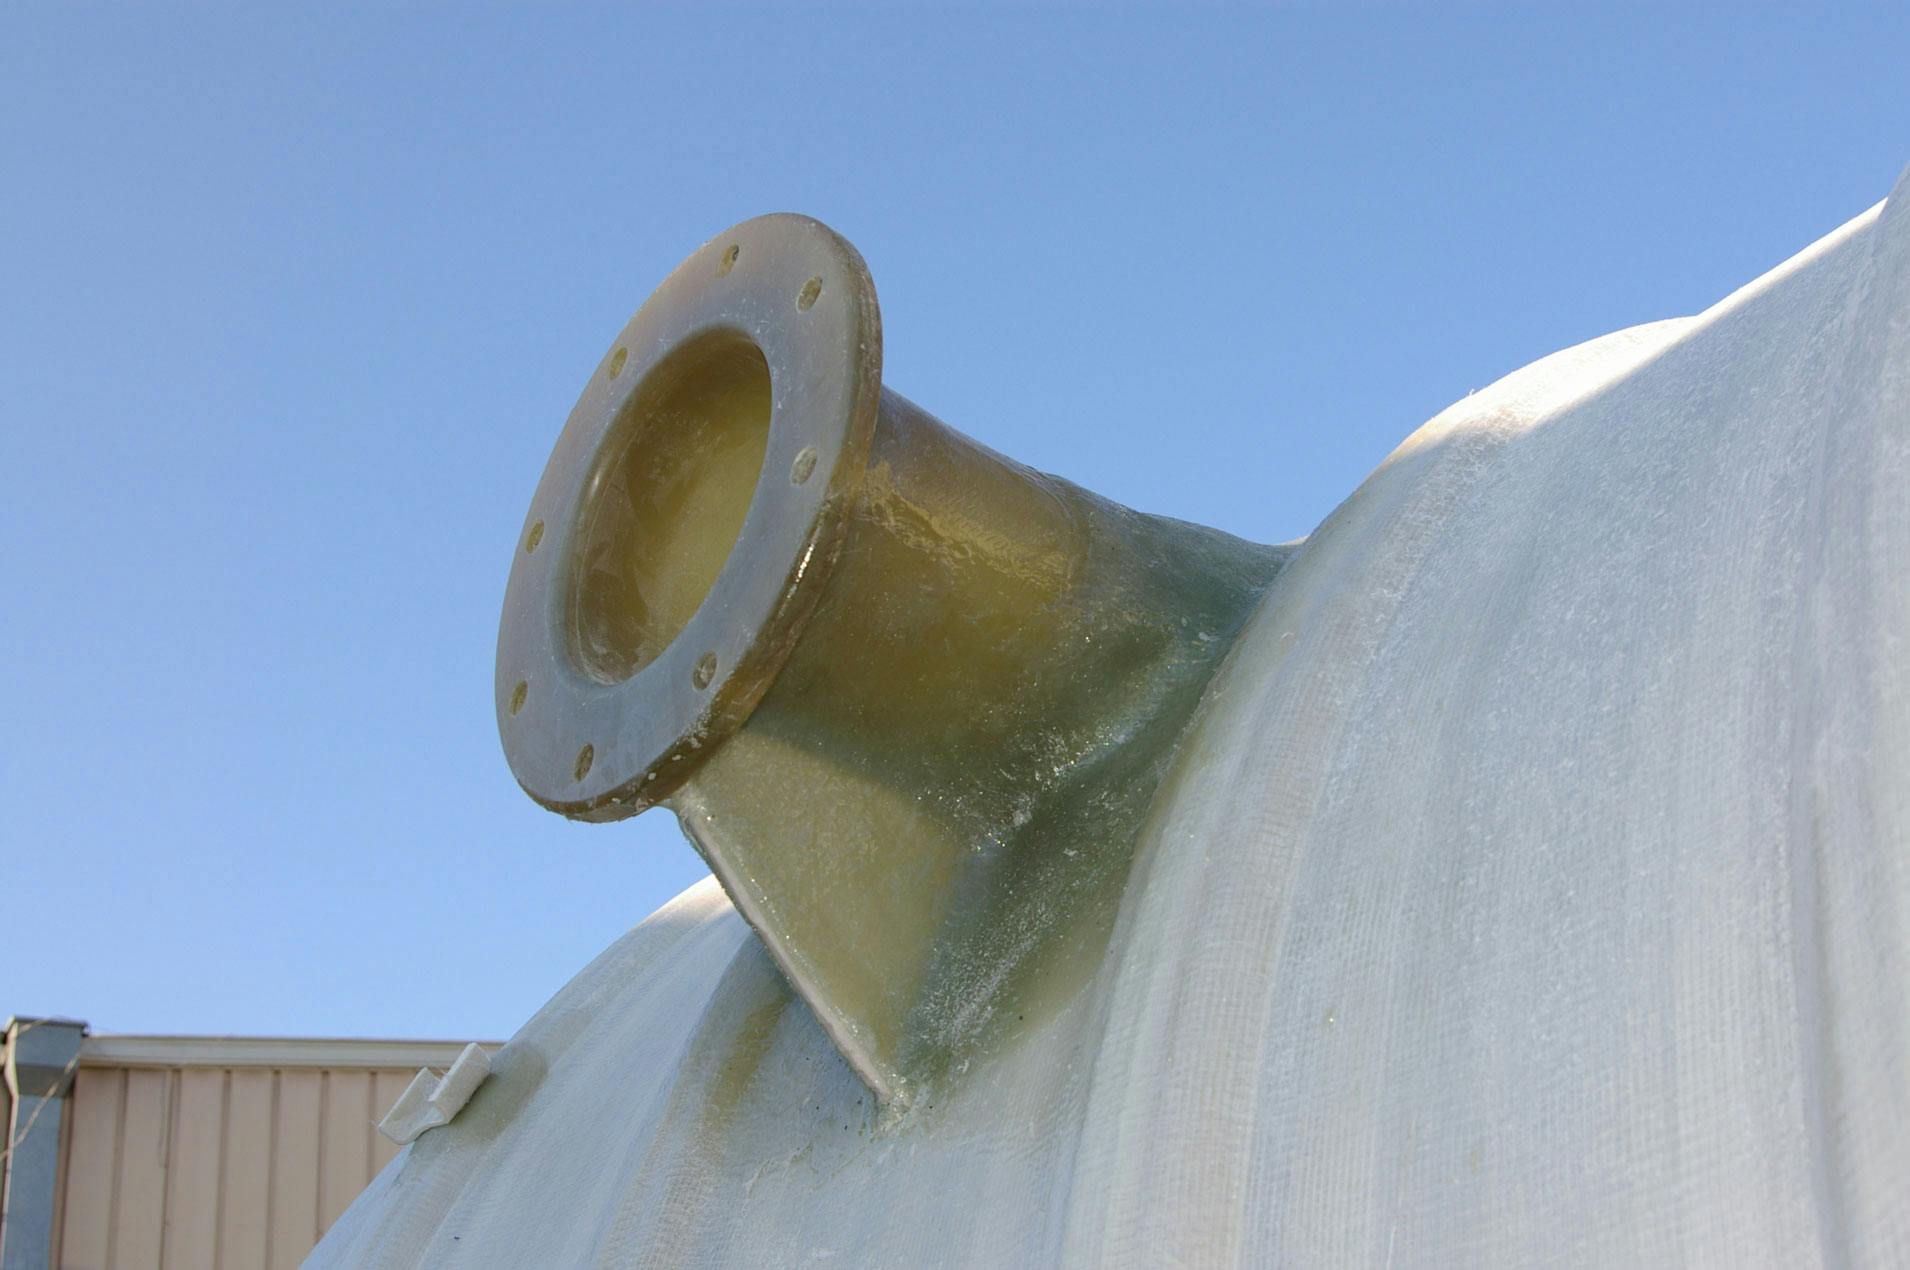 Fiberglass flanged nozzle on a tank at the manufactoring facility.